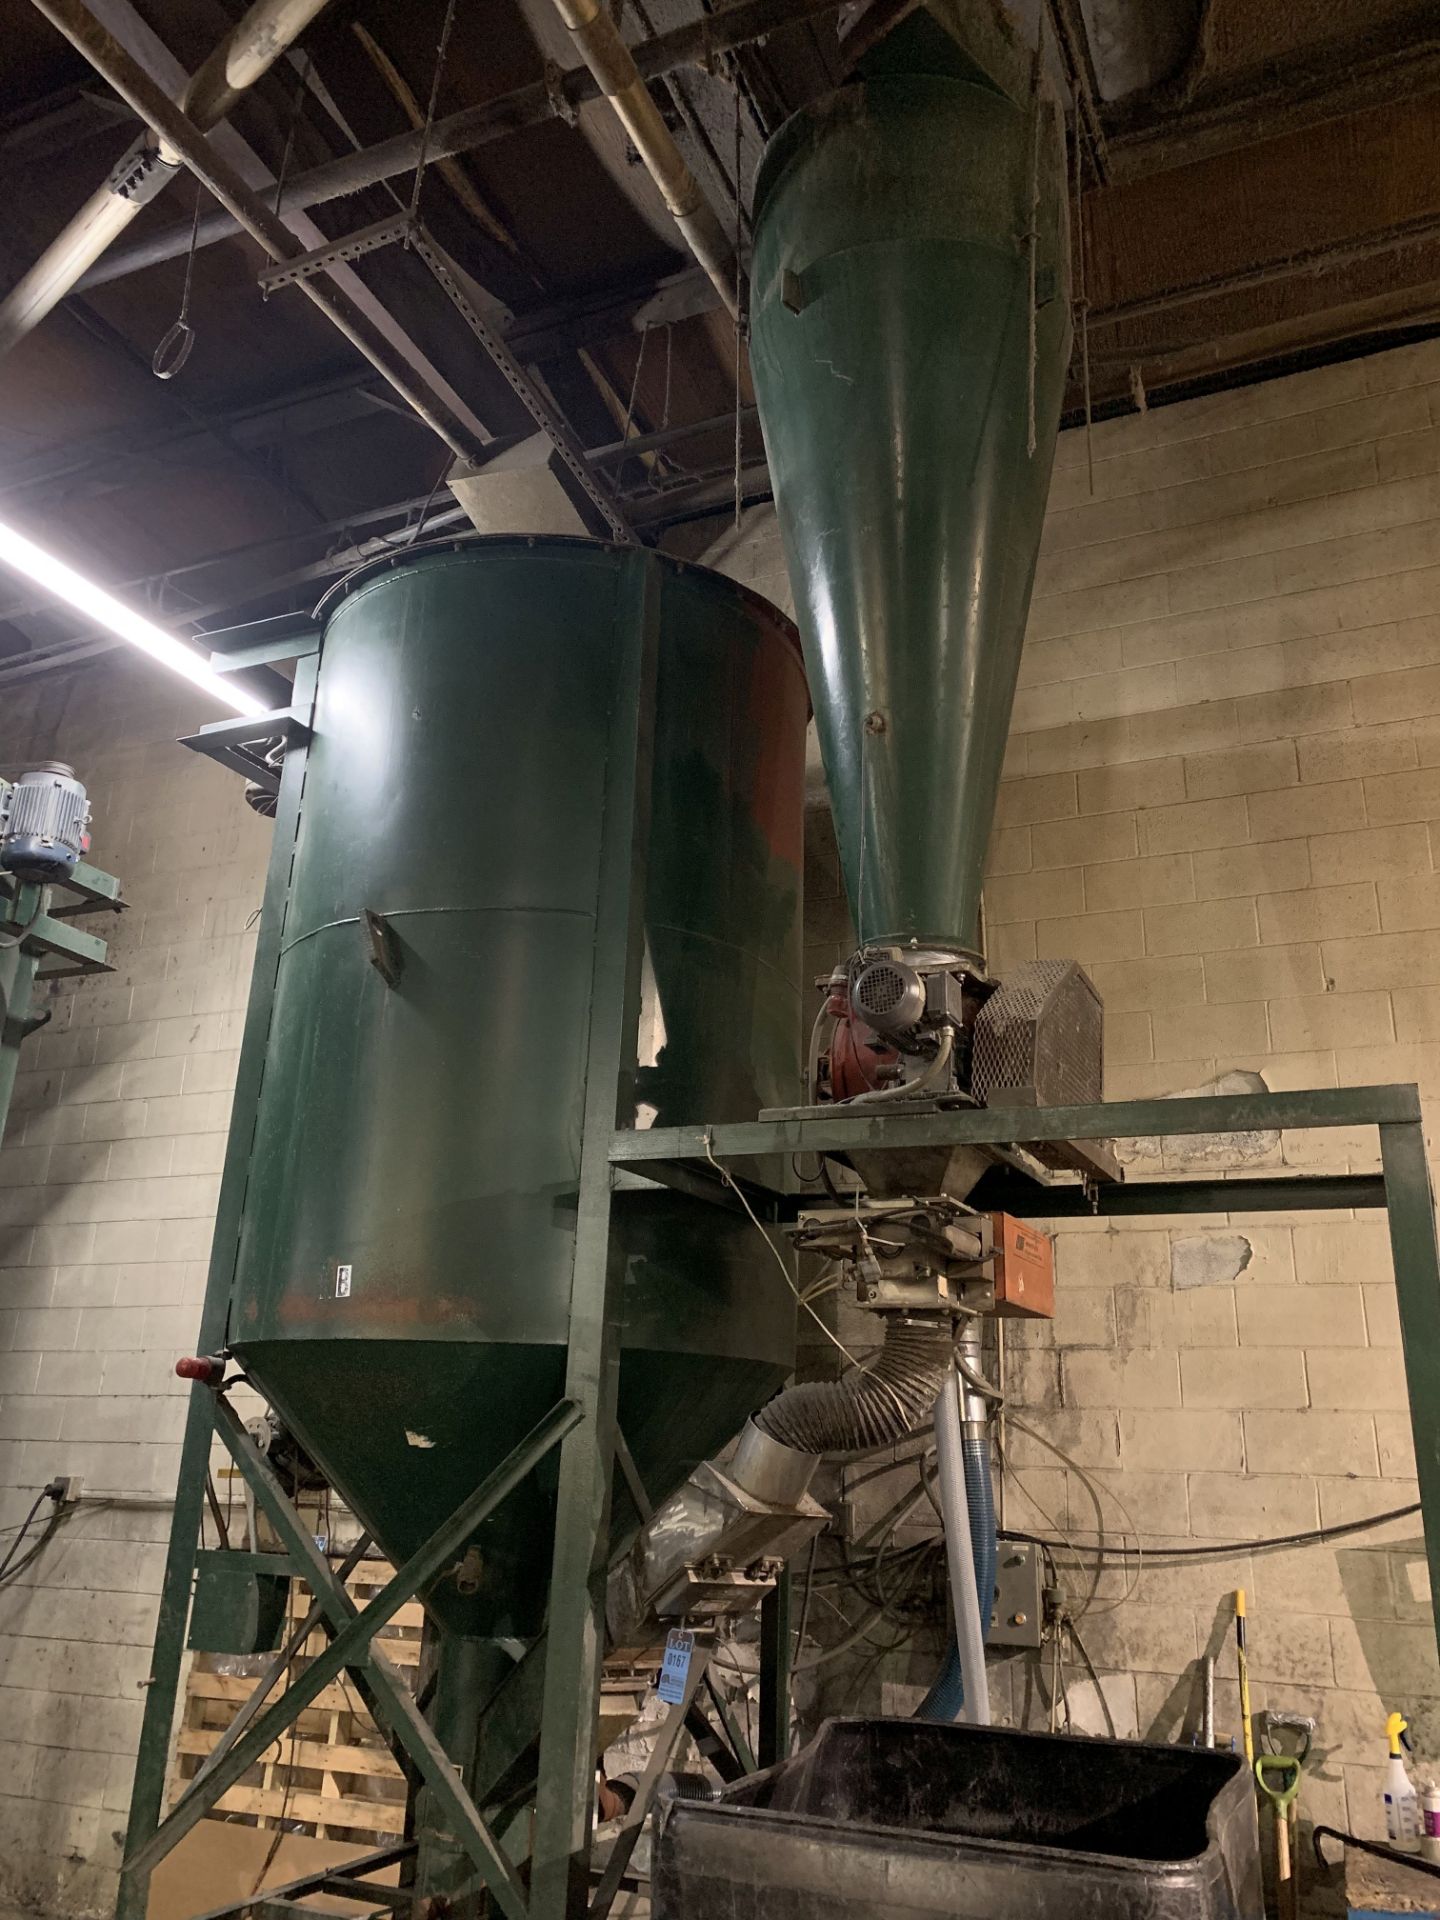 66" DIAMETER X 8' HIGH X 30" CONE BOTTOM BLENDER, 10 HP BLENDER MOTOR, WITH ATTACHED ELEVATED HOPPER - Image 2 of 5